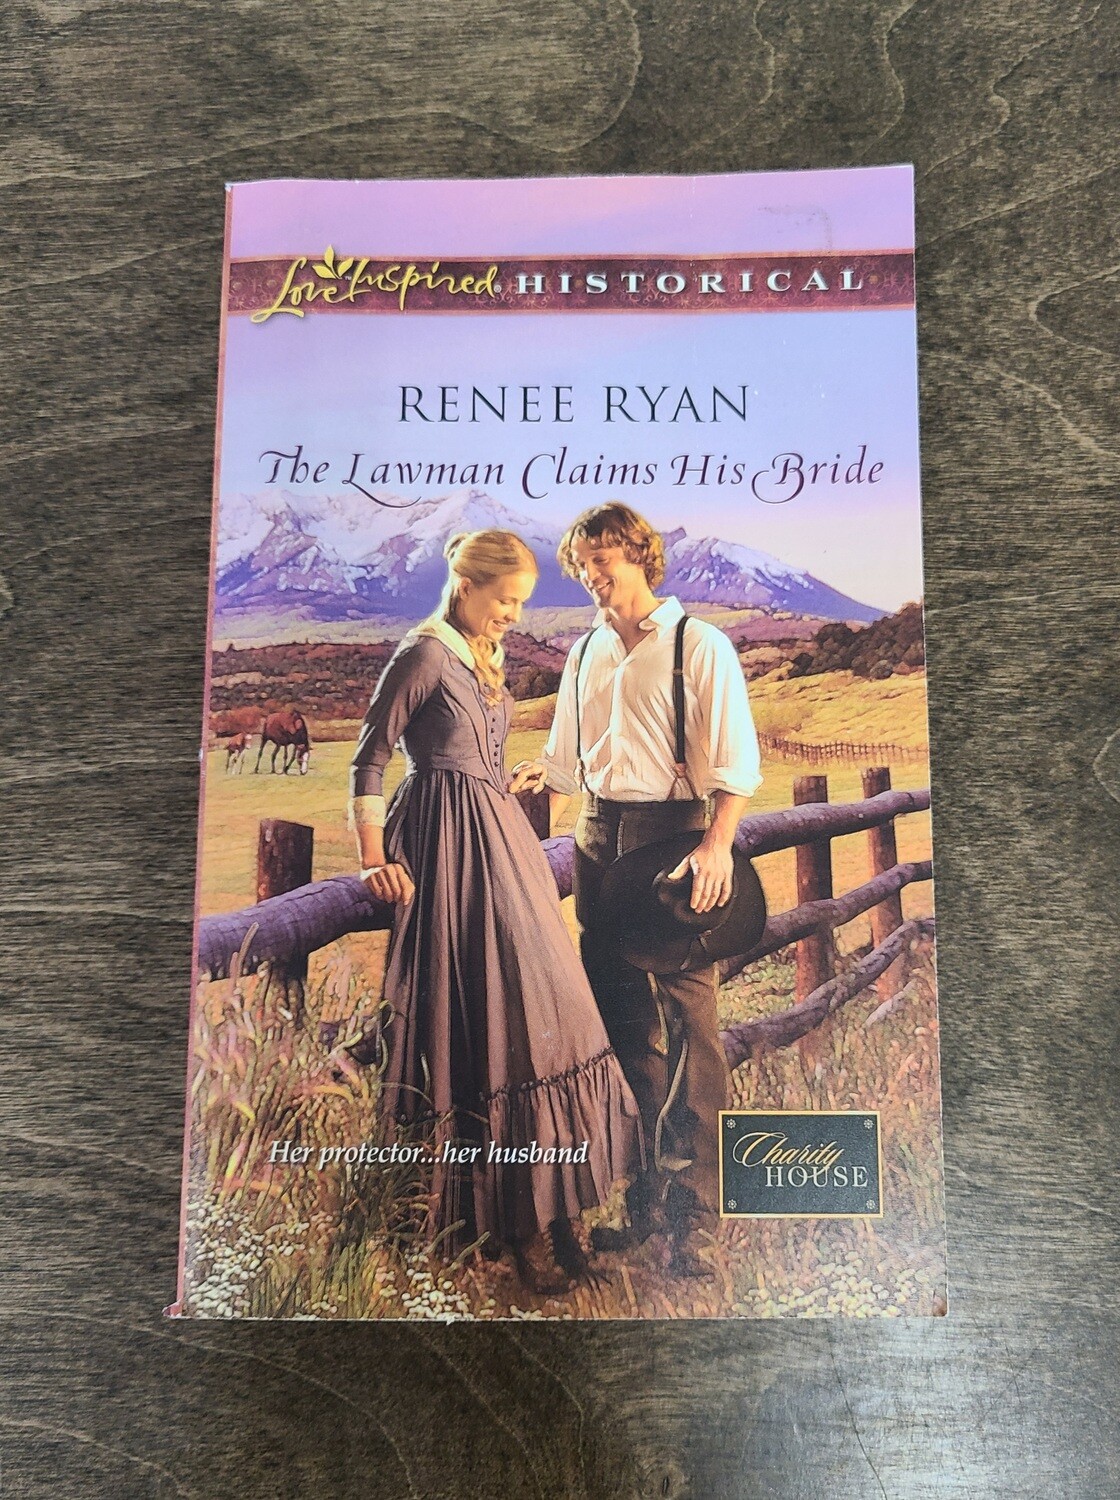 The Lawman Claims His Bride by Renee Ryan